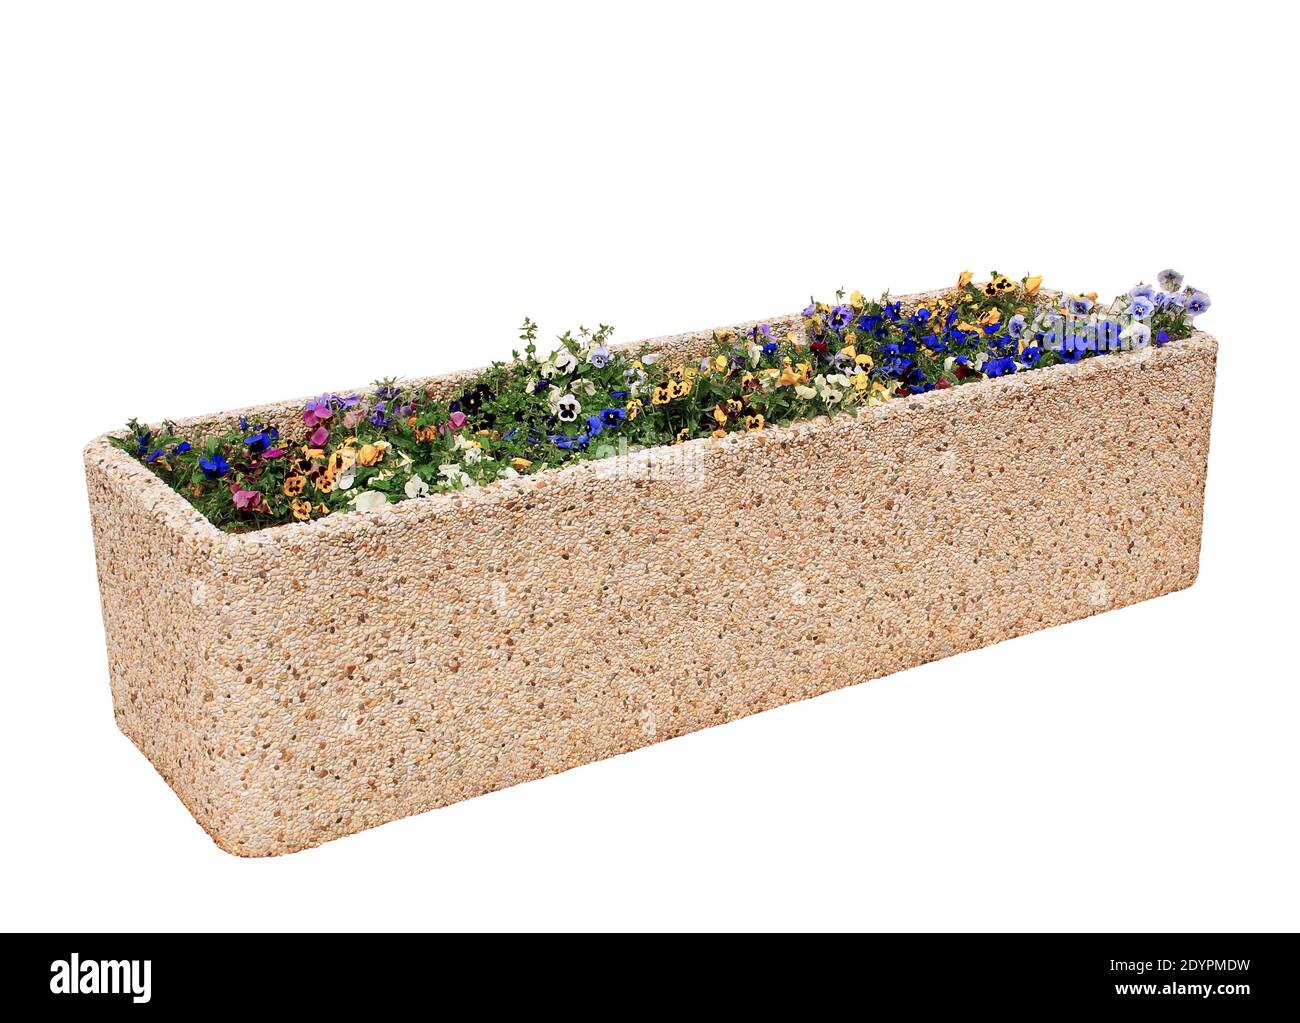 Flower box with flowers on a white background. Stock Photo